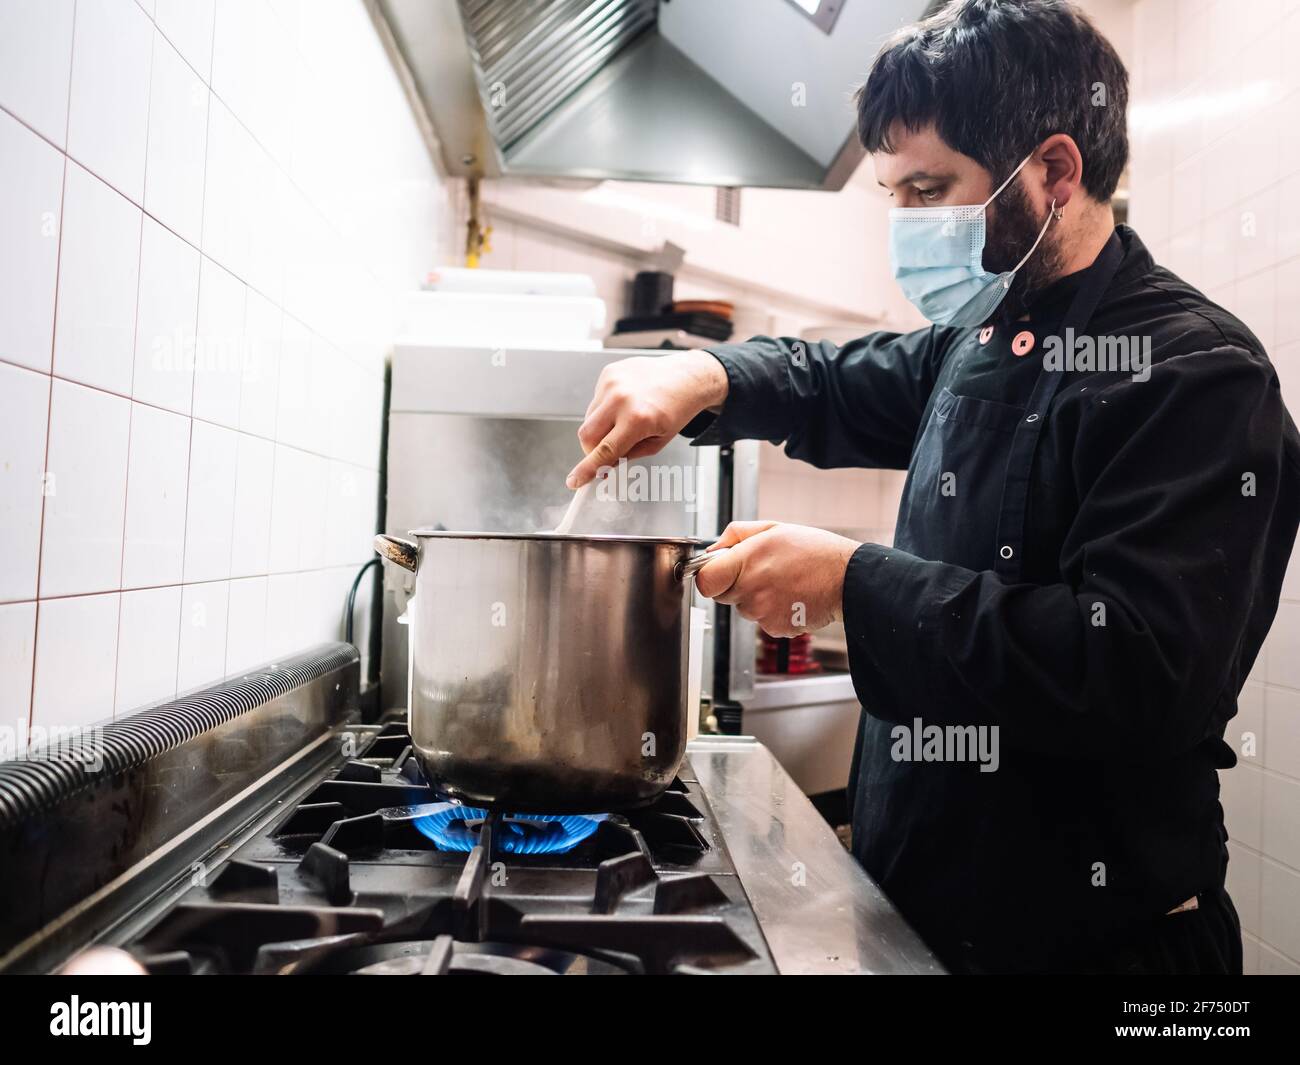 https://c8.alamy.com/comp/2F750DT/side-view-of-professional-male-cook-in-mask-stirring-dish-in-saucepan-while-cooking-on-stove-in-kitchen-of-restaurant-2F750DT.jpg